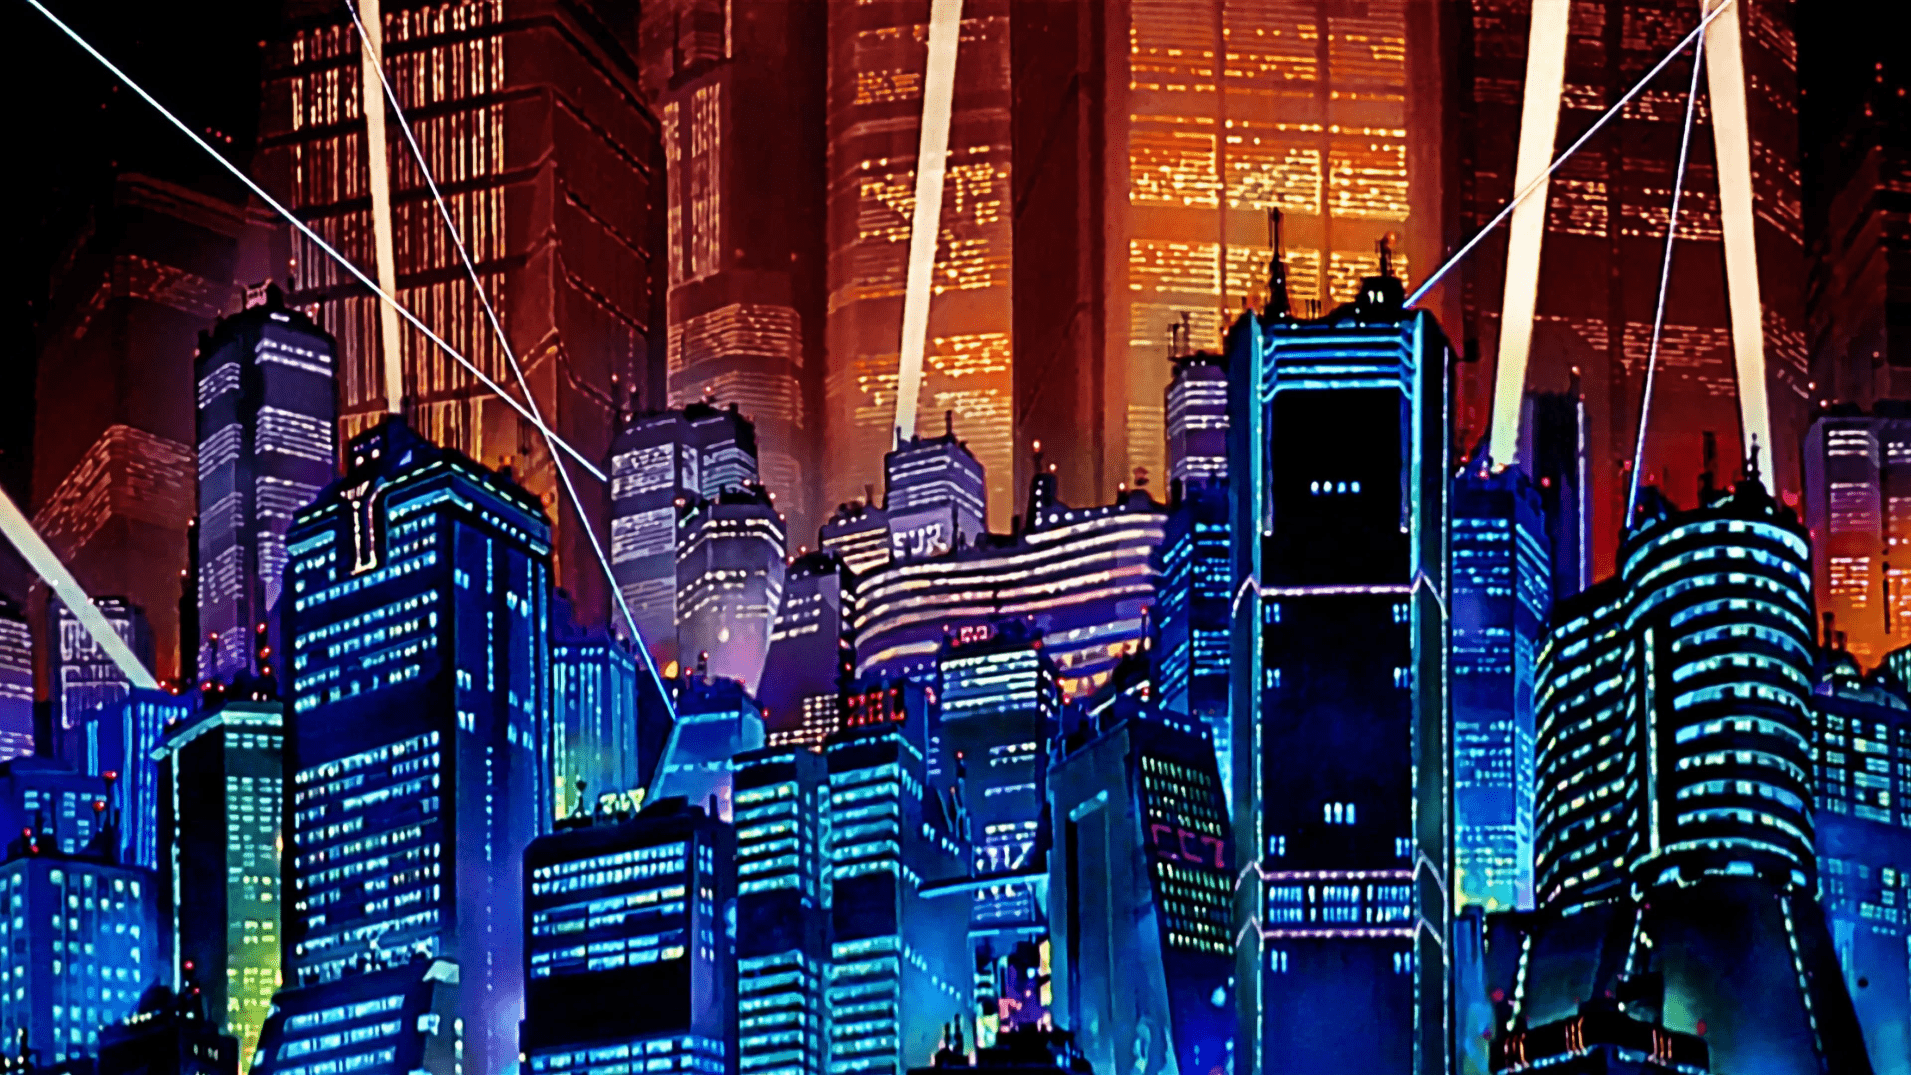 A cityscape at night with a cyberpunk vibe - Tokyo